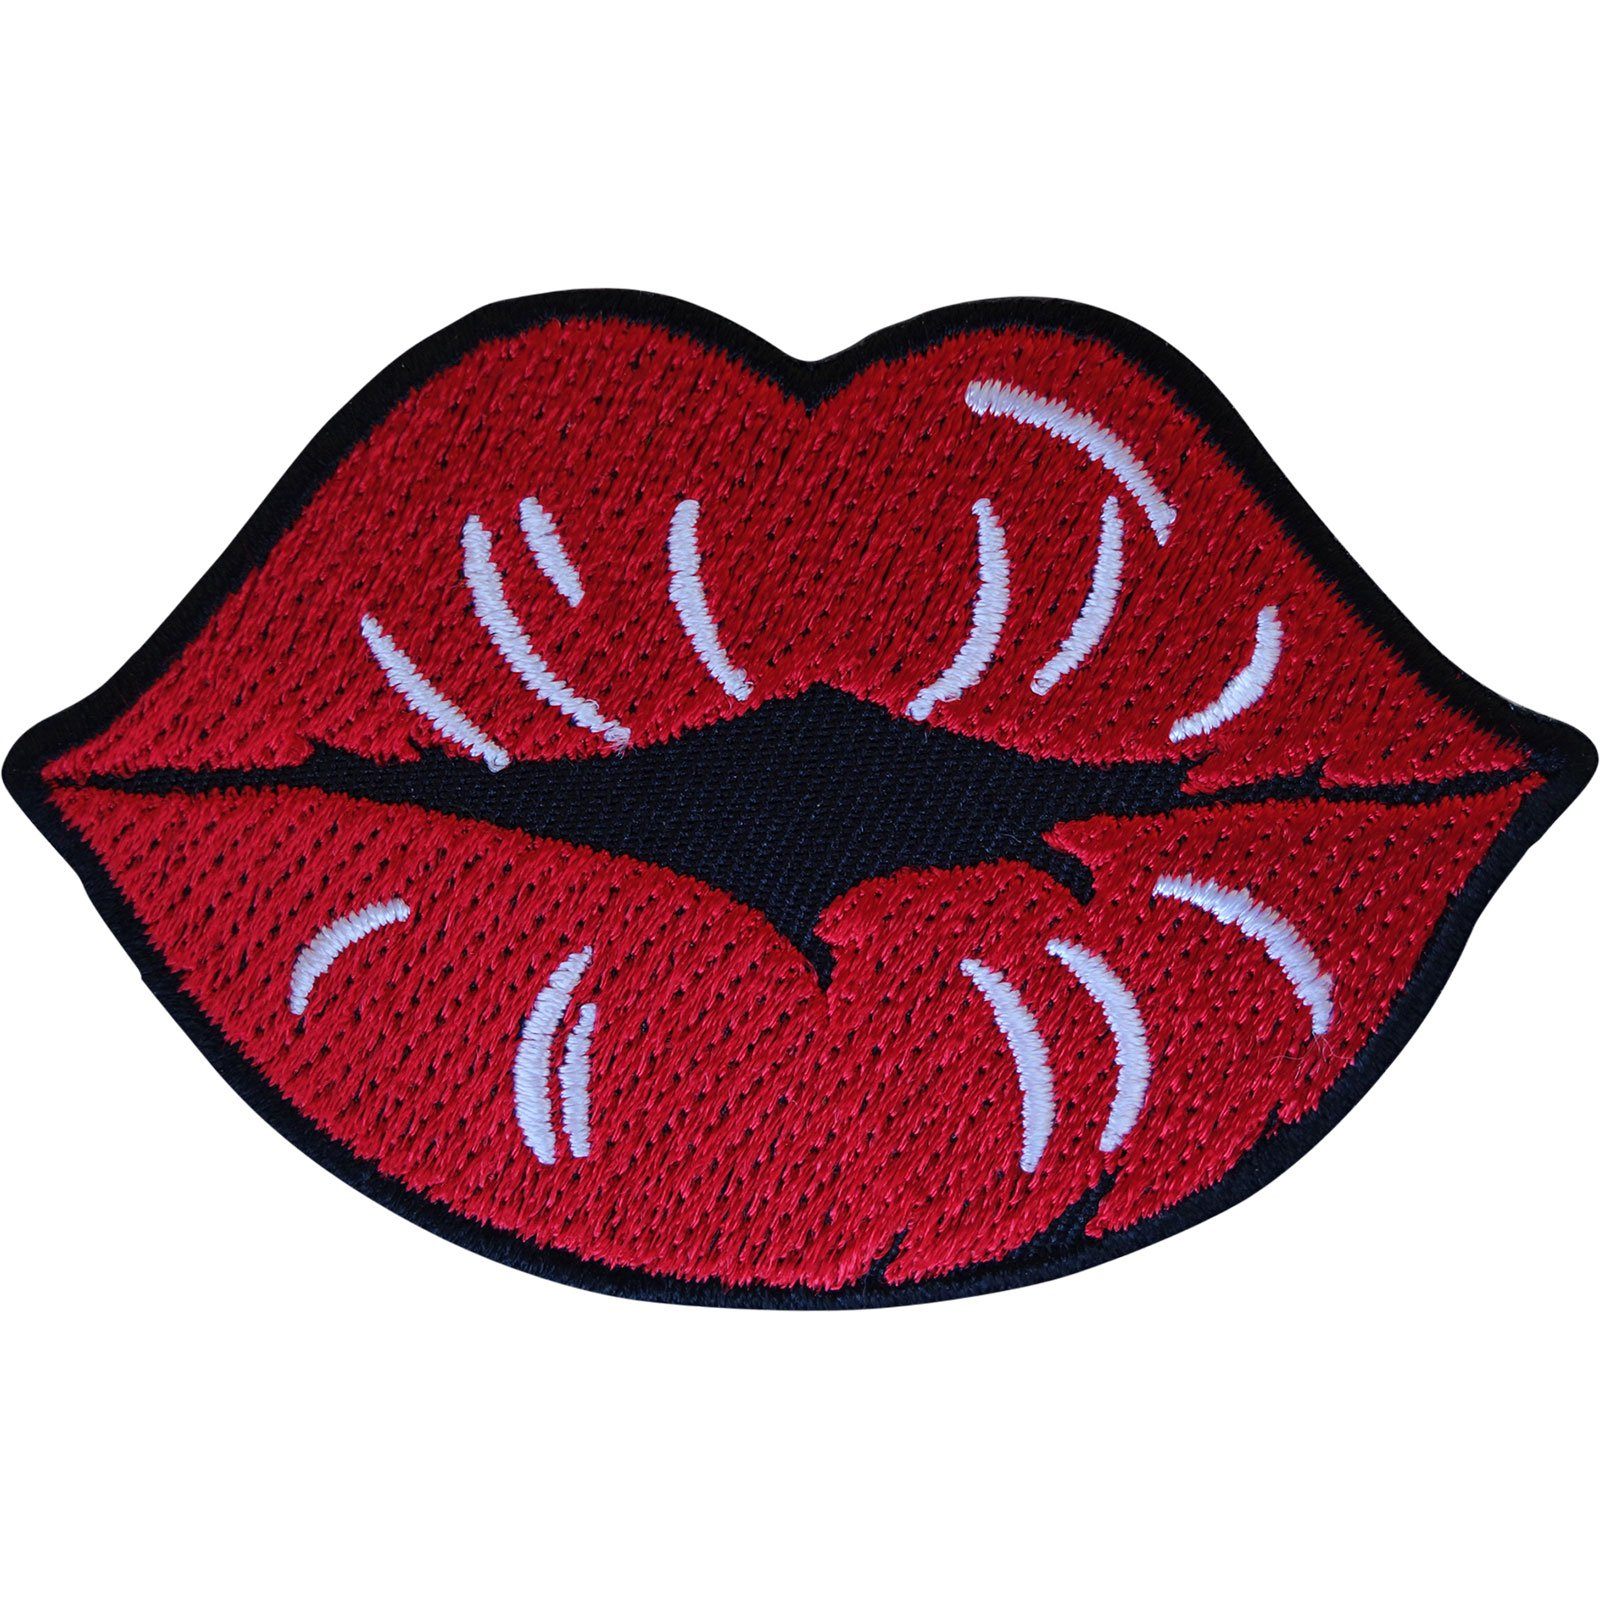 Red Lips Patch Iron On Sew On Clothes Bag Embroidered Badge Embroidery Applique